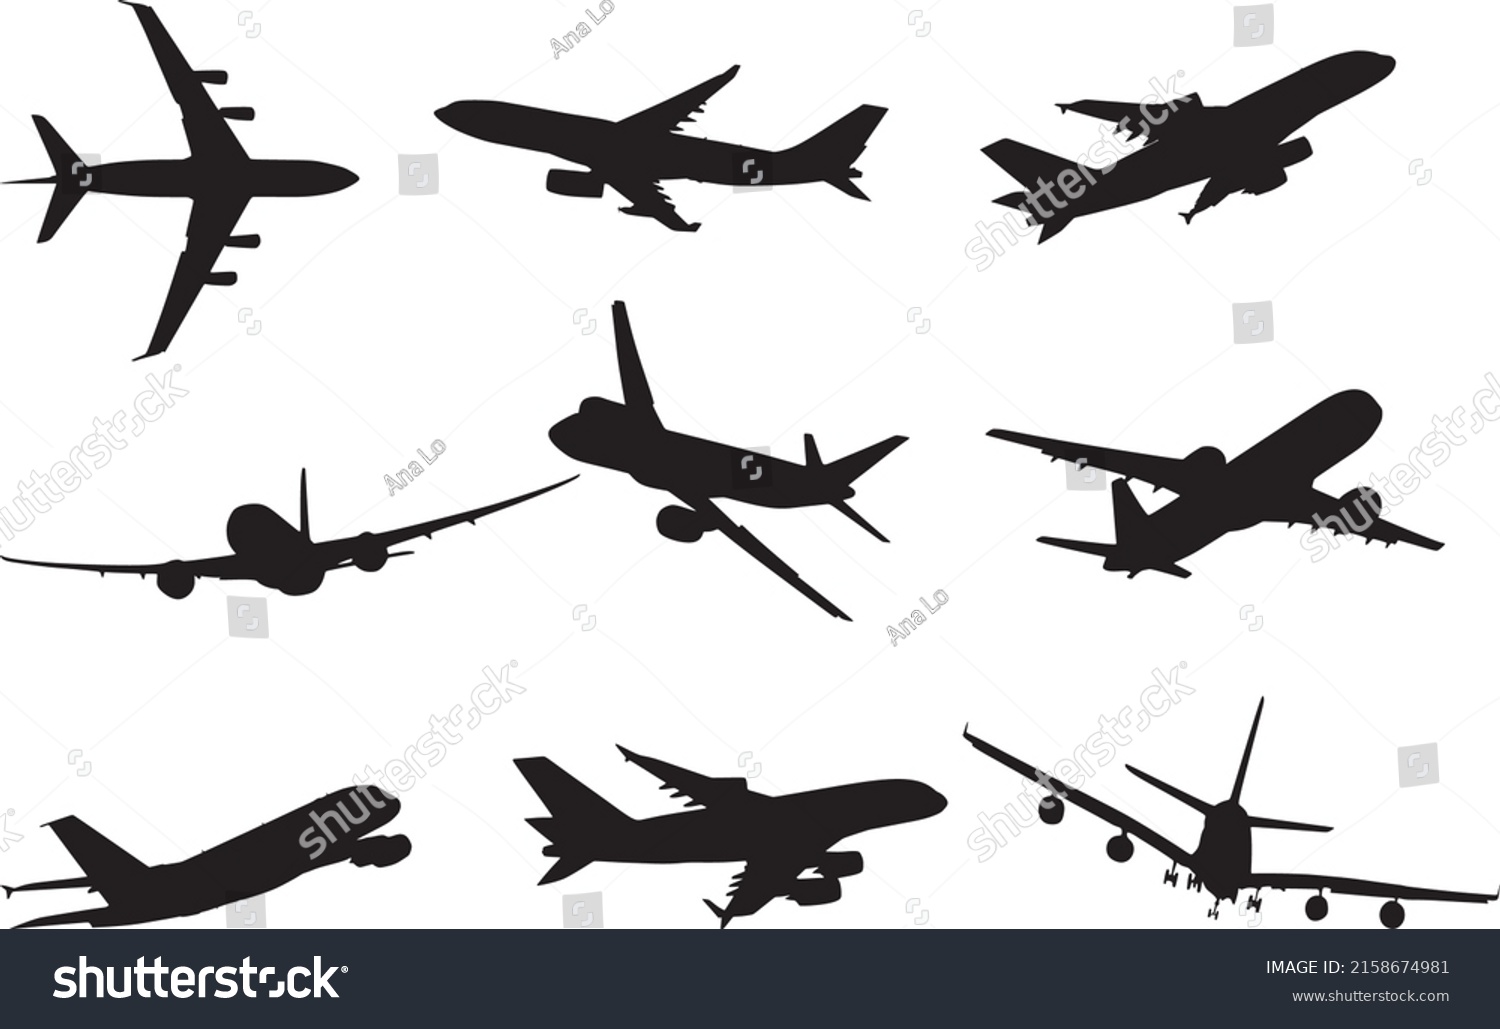 SVG of Vector set of passenger aircraft silhouettes. Shadows of iron birds, airplanes, air liners. svg